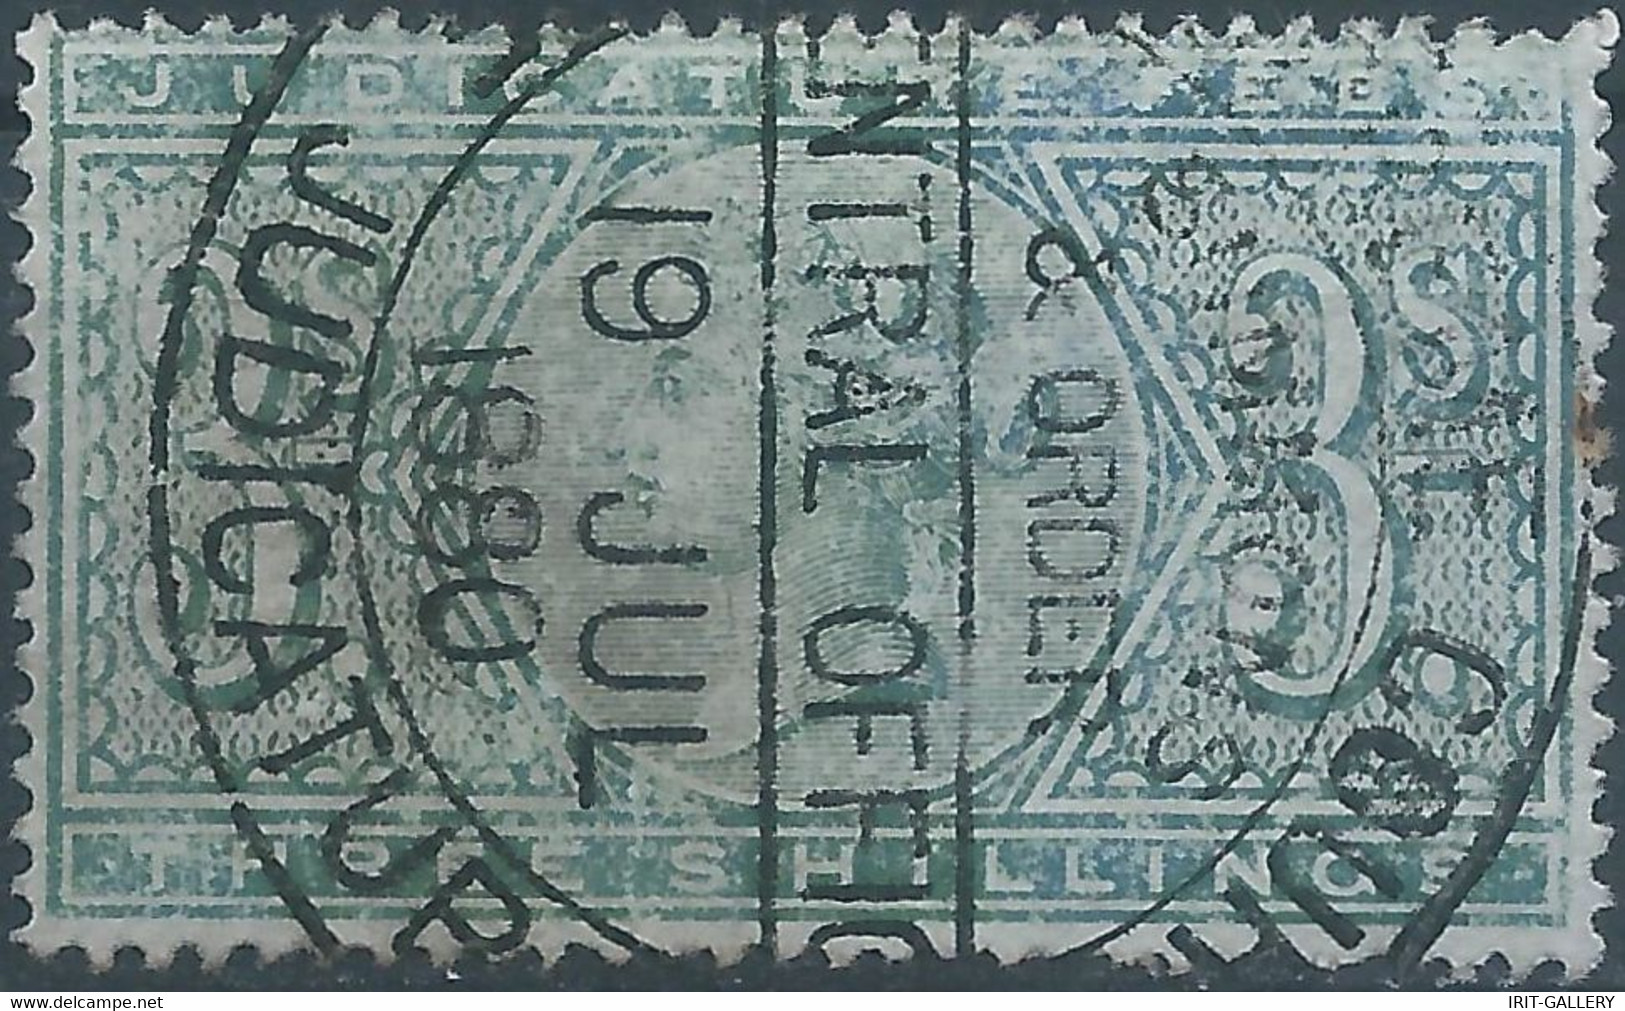 Great Britain-ENGLAND,Queen Victoria,1880 Revenue Stamp Tax Fiscal,JUDICATURE FEES, 3 Shillings,Used - Revenue Stamps